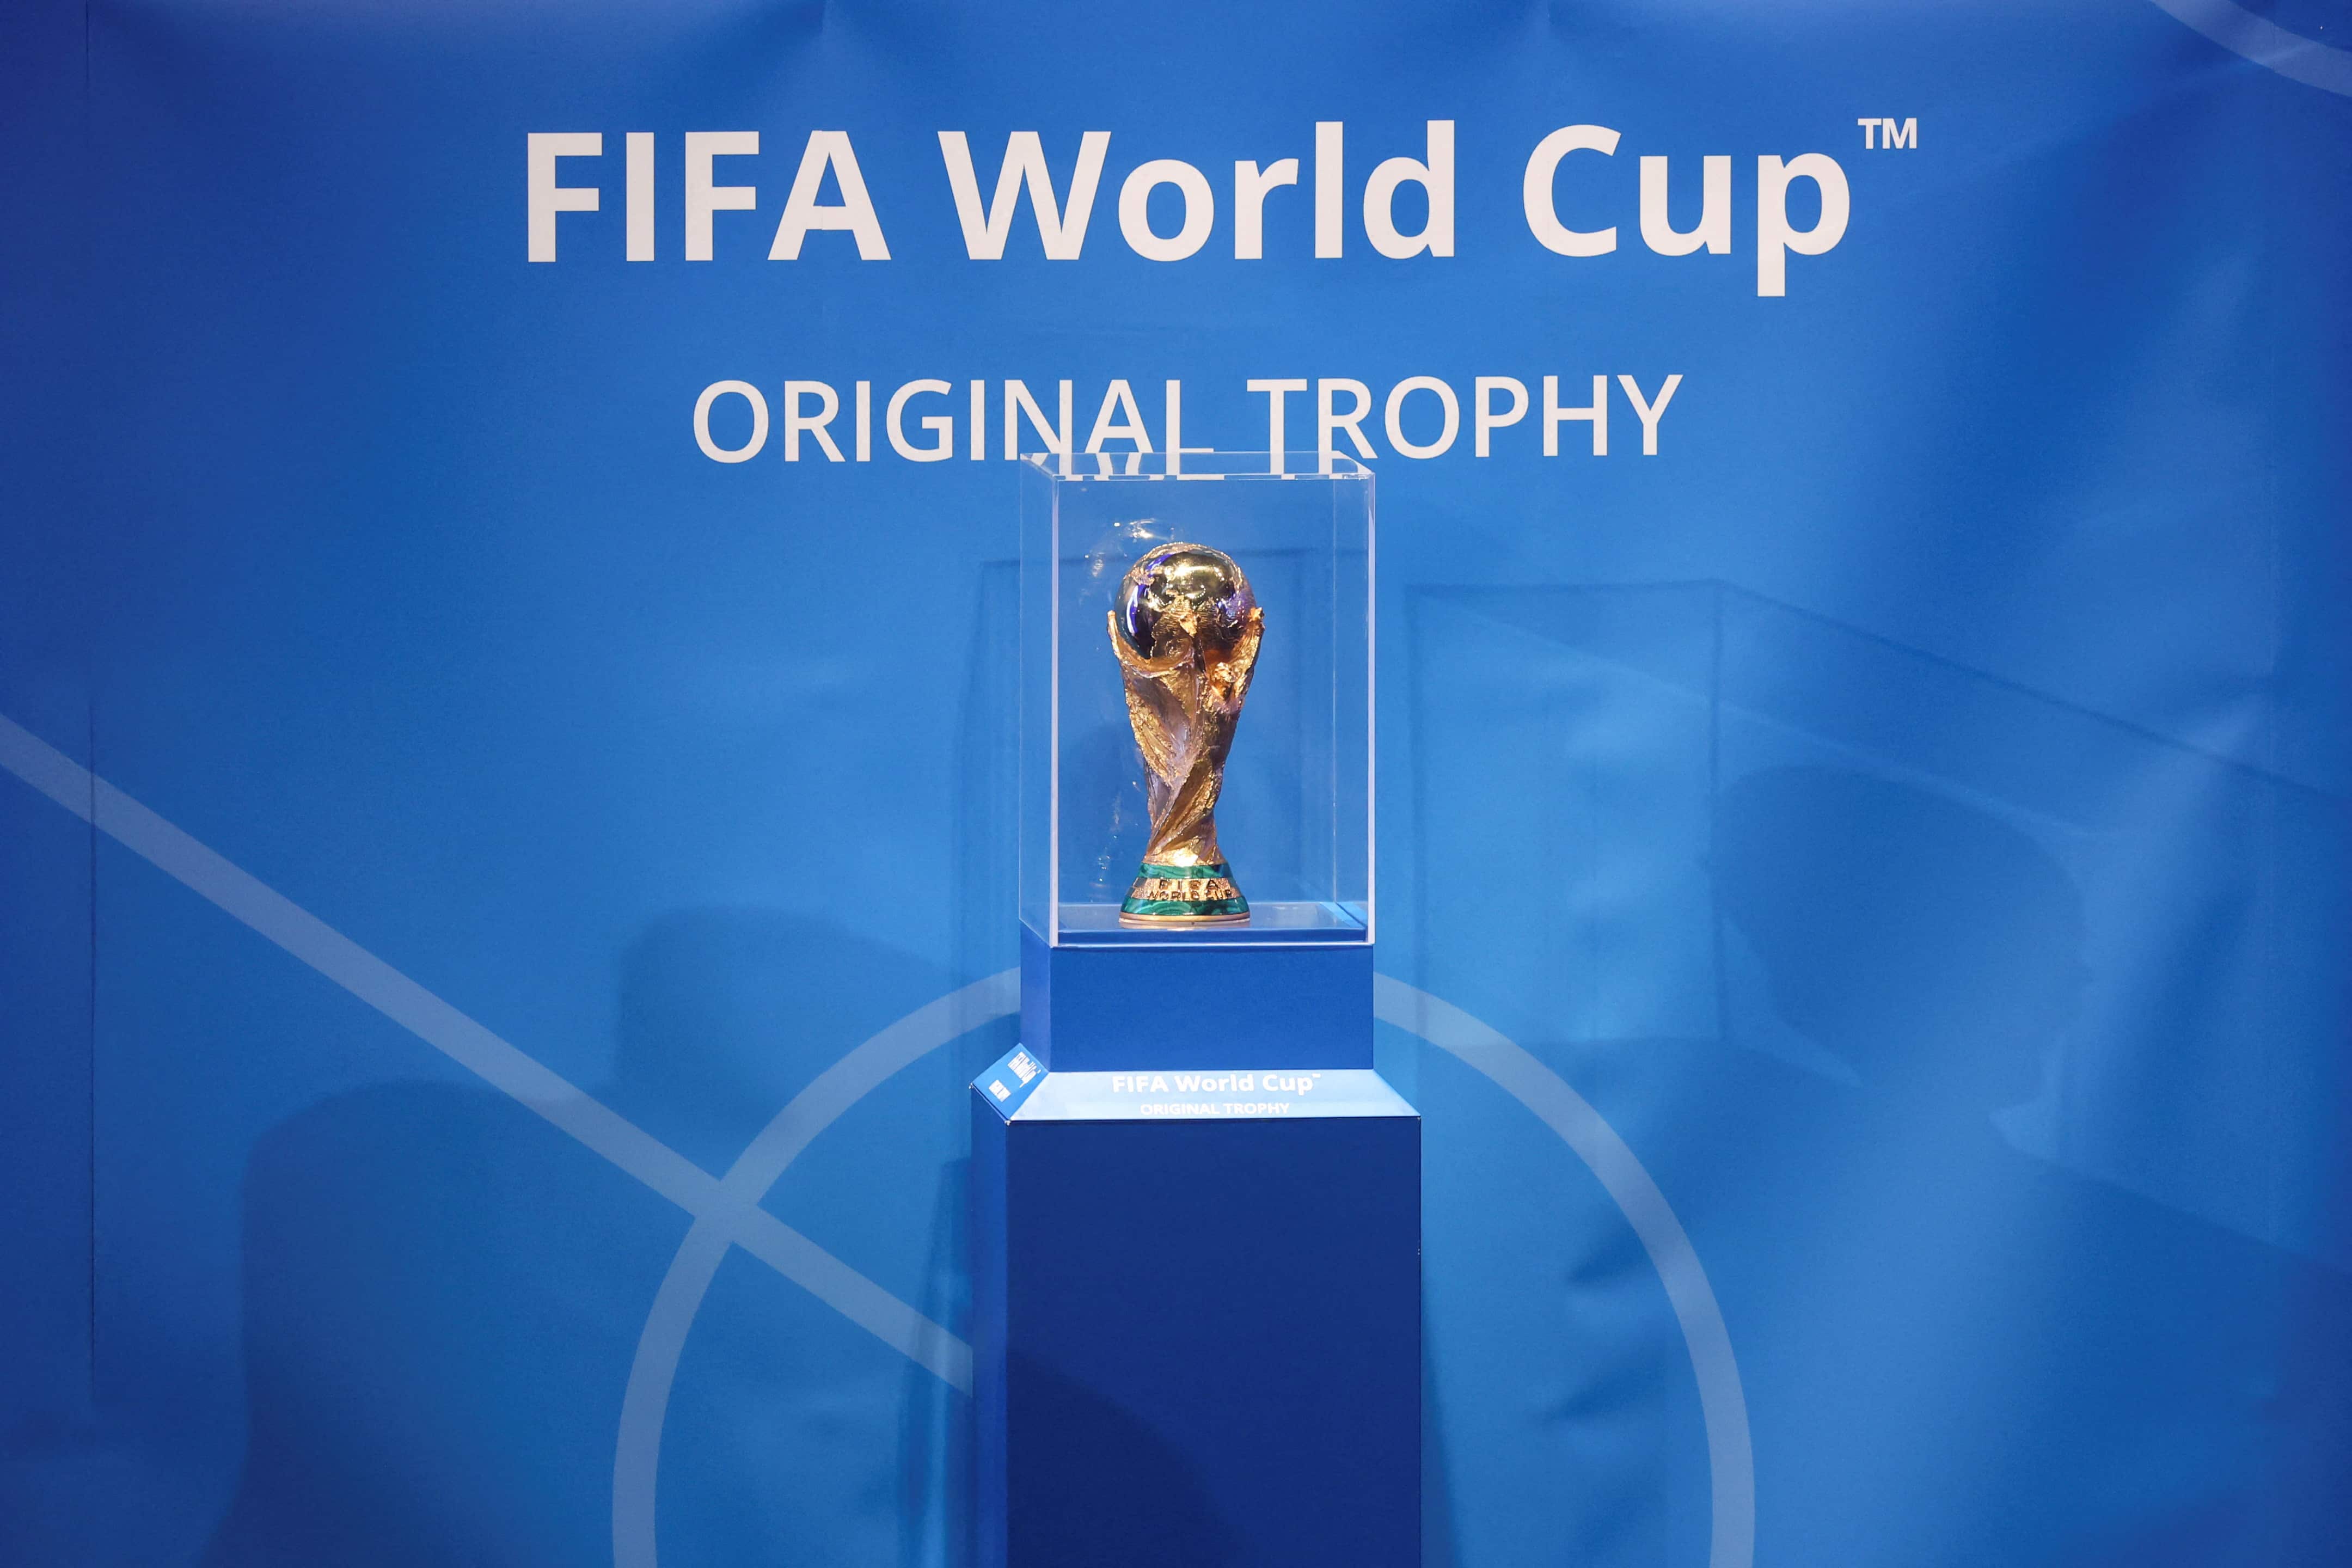 FIFA World Cup 2022 Qatar Many firsts in this FIFA edition FIFA World Cup 2022 Qatar vs Ecuador squad, schedule dates, opening ceremony time, teams, broadcast in India, Qatar stadiums, tickets